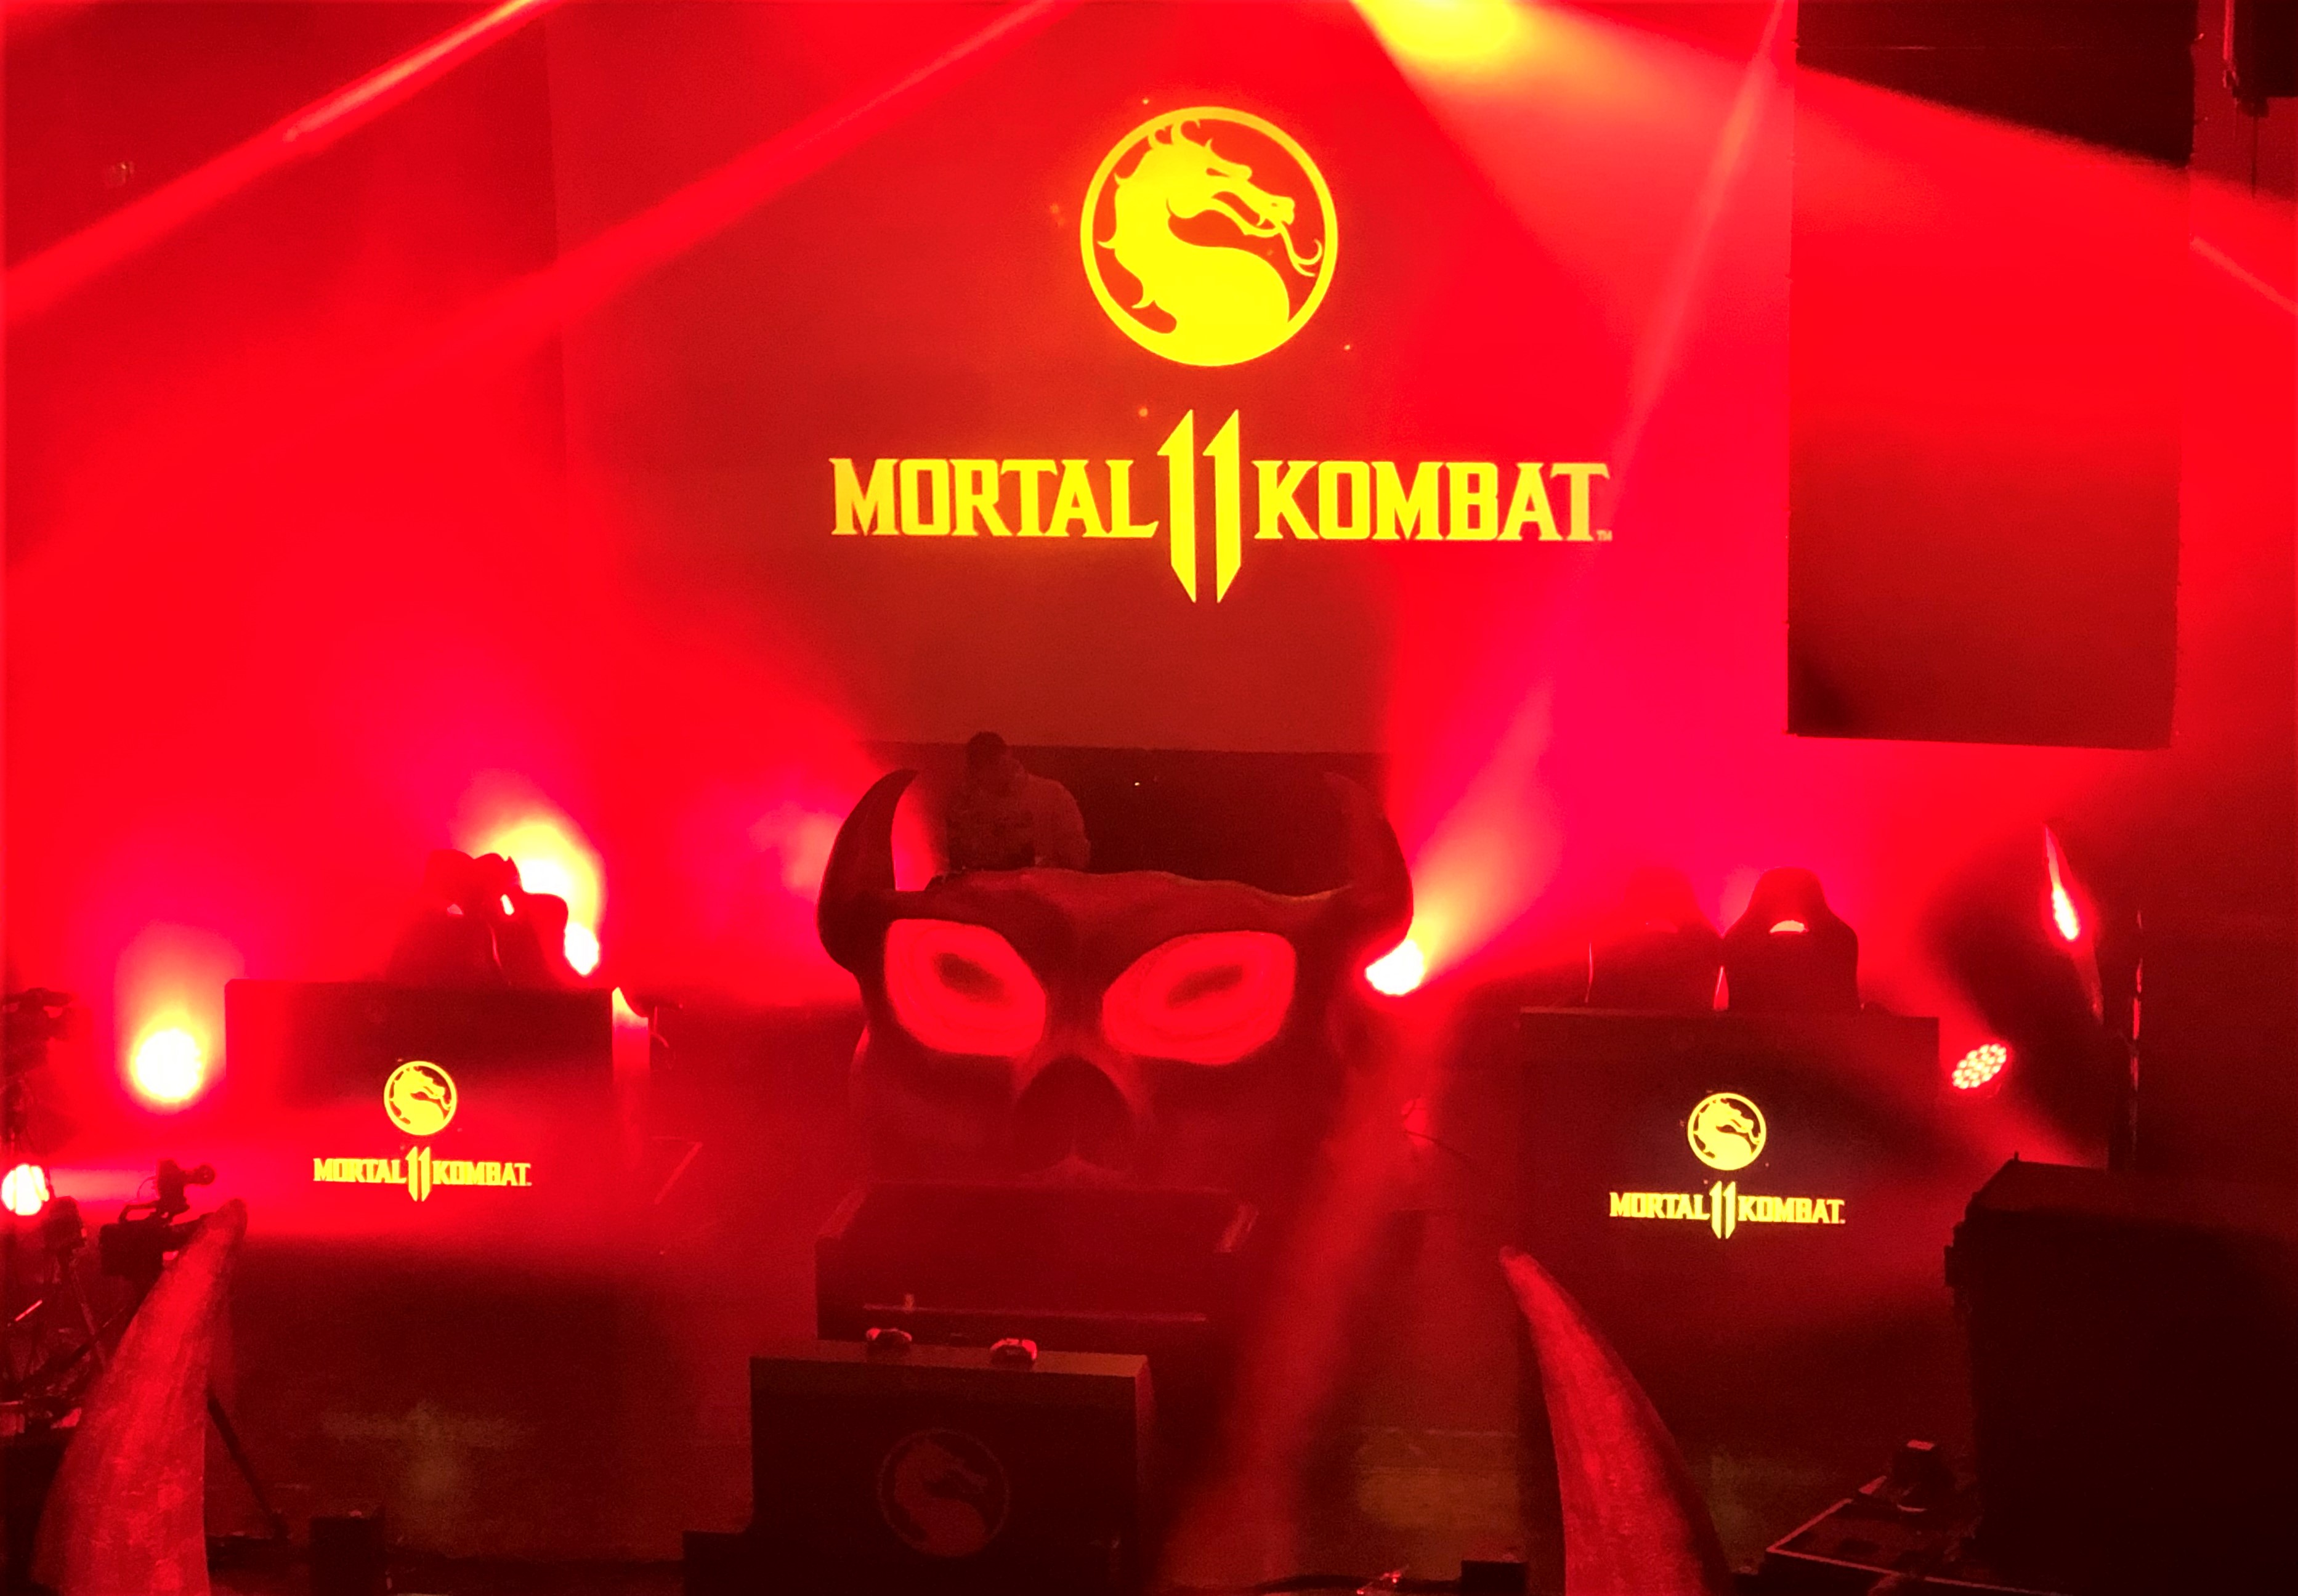 The main stage at the Mortal Kombat 11 launch event in London